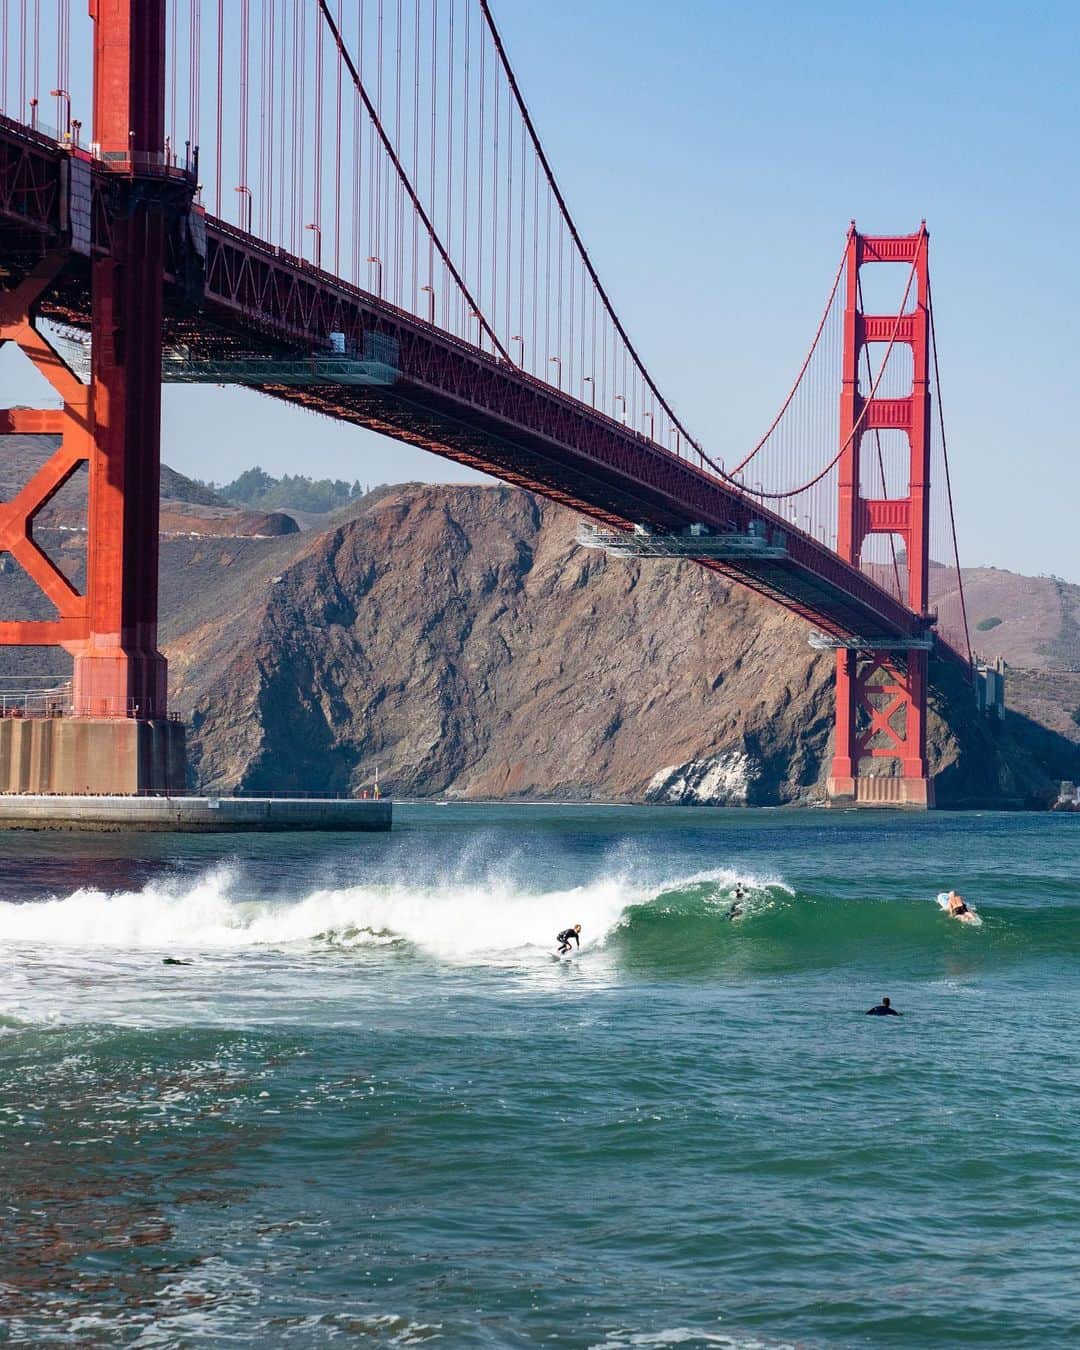 Travis Burkeのインスタグラム：「I’m finally back on the road and what a cool first stop, surfing under the Golden Gate Bridge in San Francisco!  It feels so good to be getting back in my flow state, traveling and chasing new adventures.  Disclaimer- This place is not for beginners, from the hidden underwater boulders, shark attacks, and strong currents, there is a lot to be on the lookout for. And remember to always respect the locals!  Huge thanks to @gypsealaysea for documenting the day before we continued heading north.」